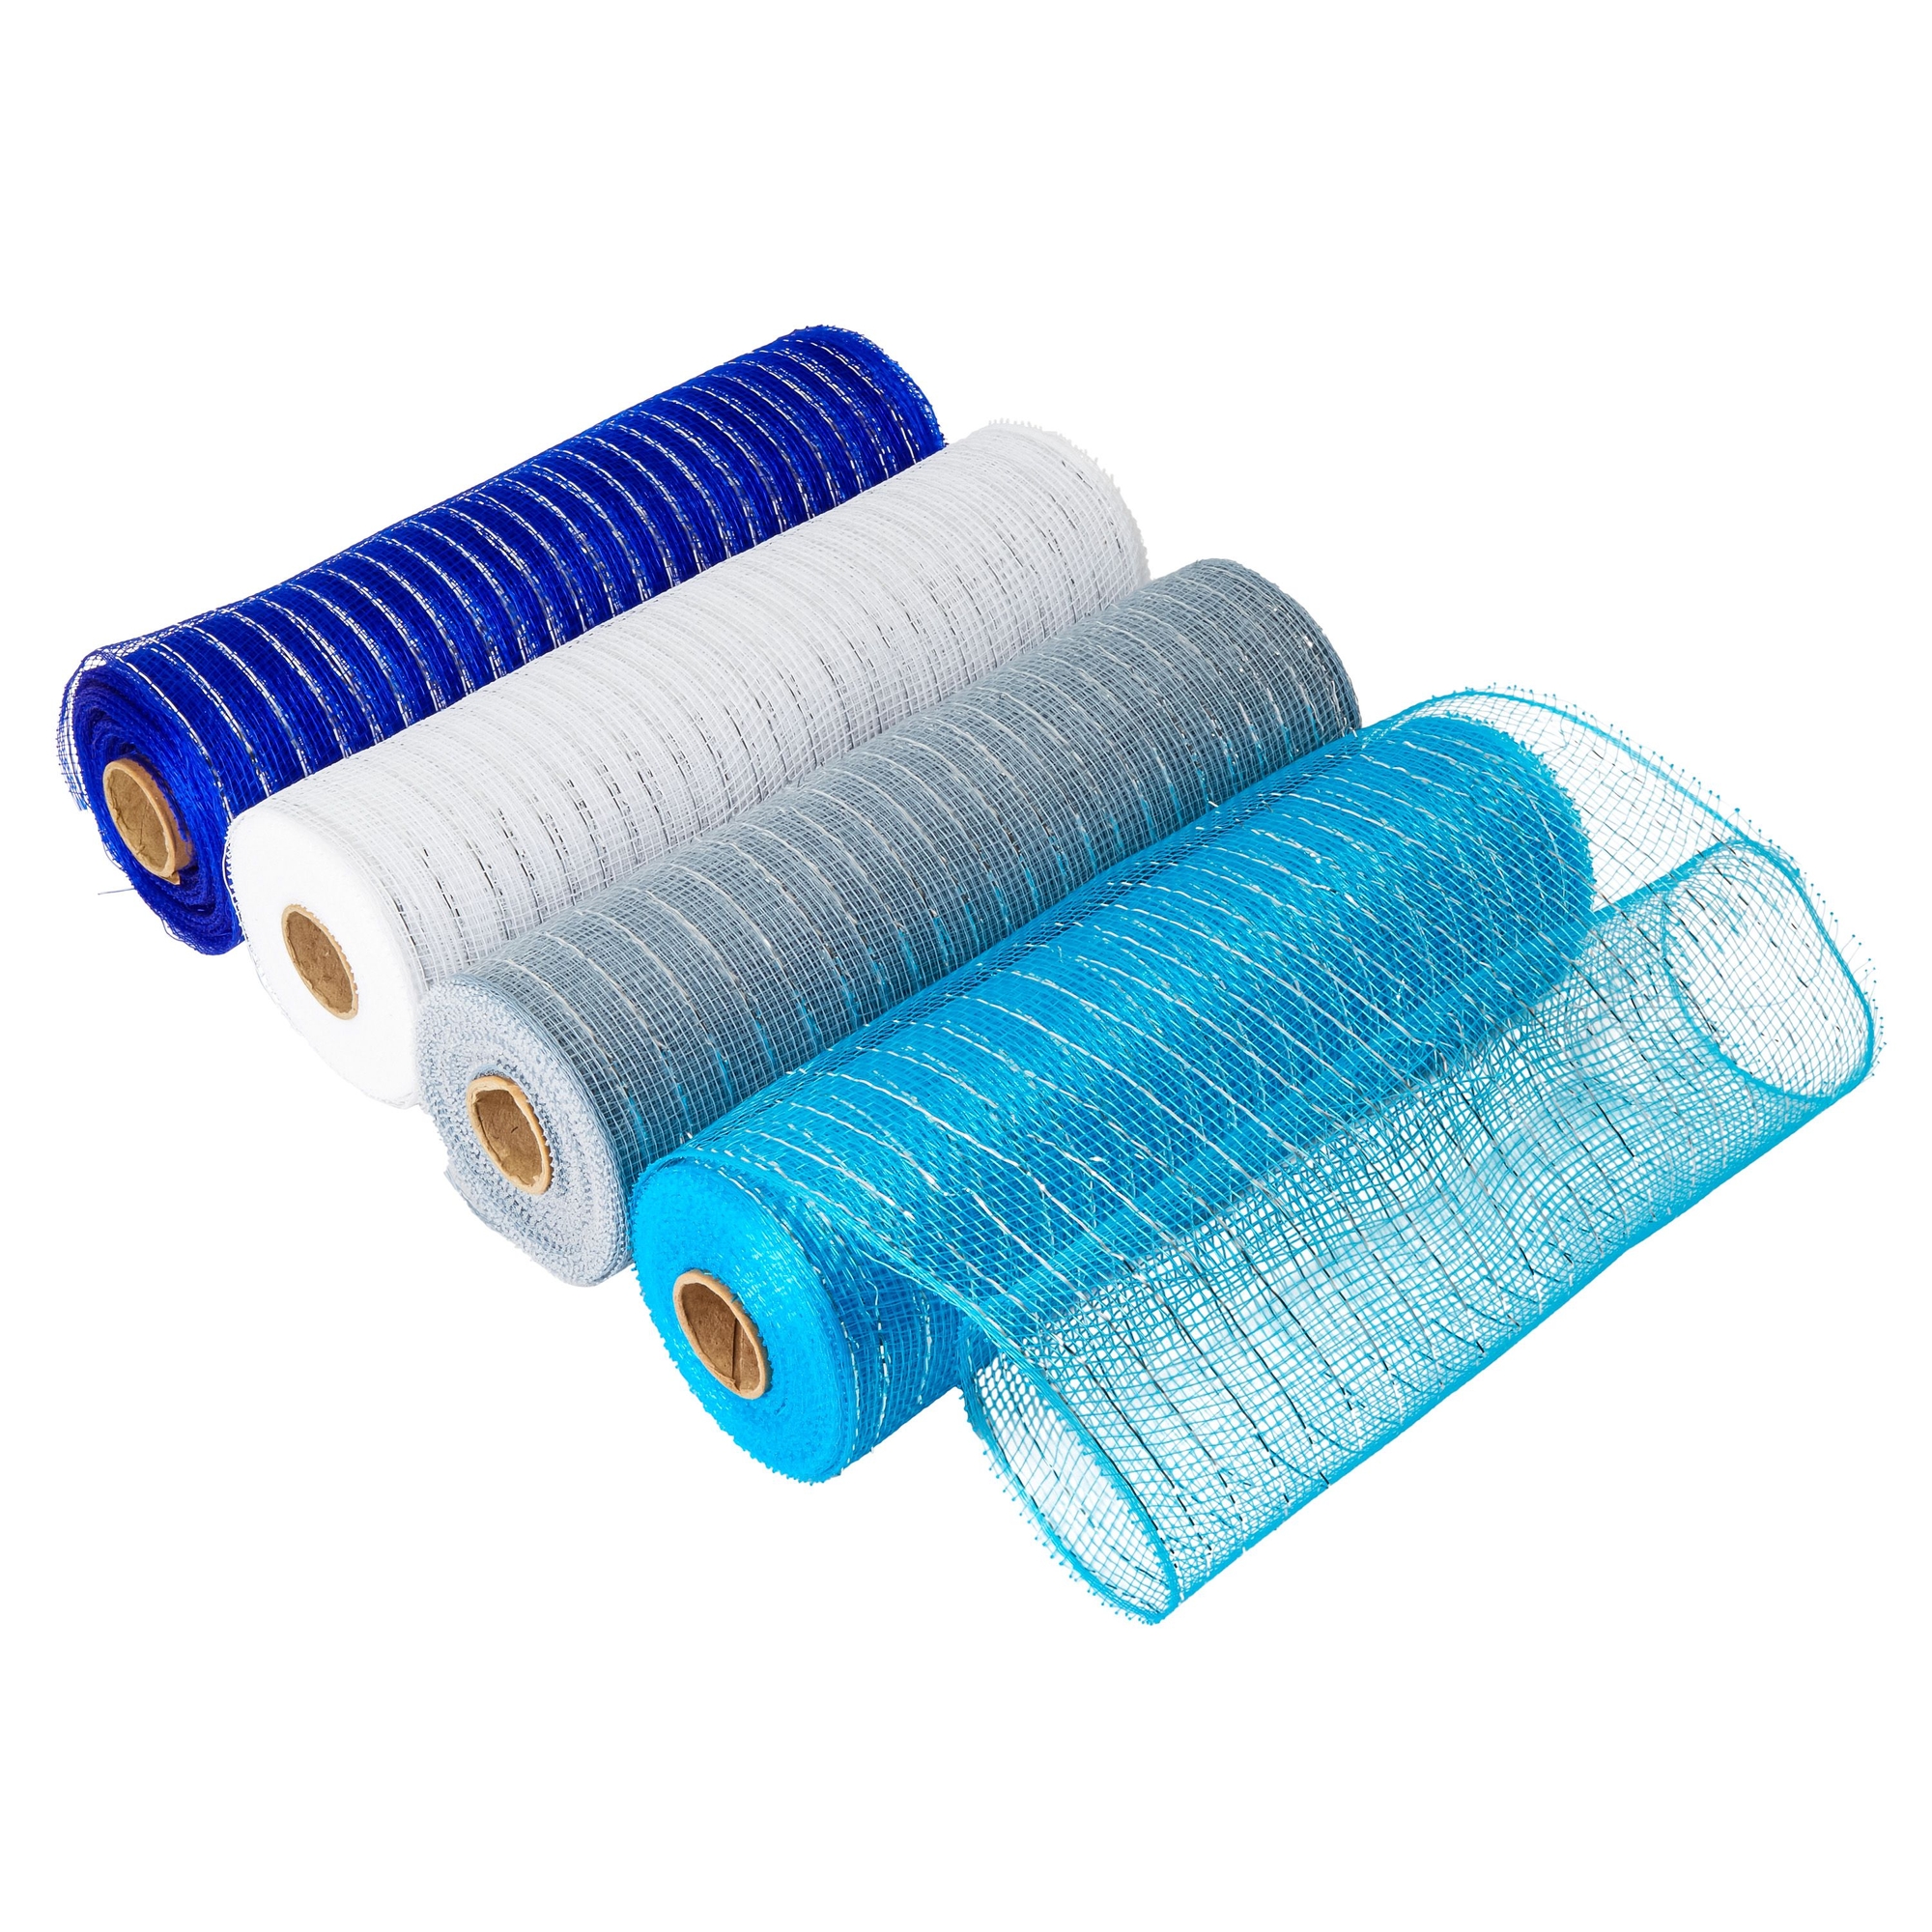 4-Pack Deco Mesh Ribbon Rolls, 10 in x 30 ft Craft Mesh for